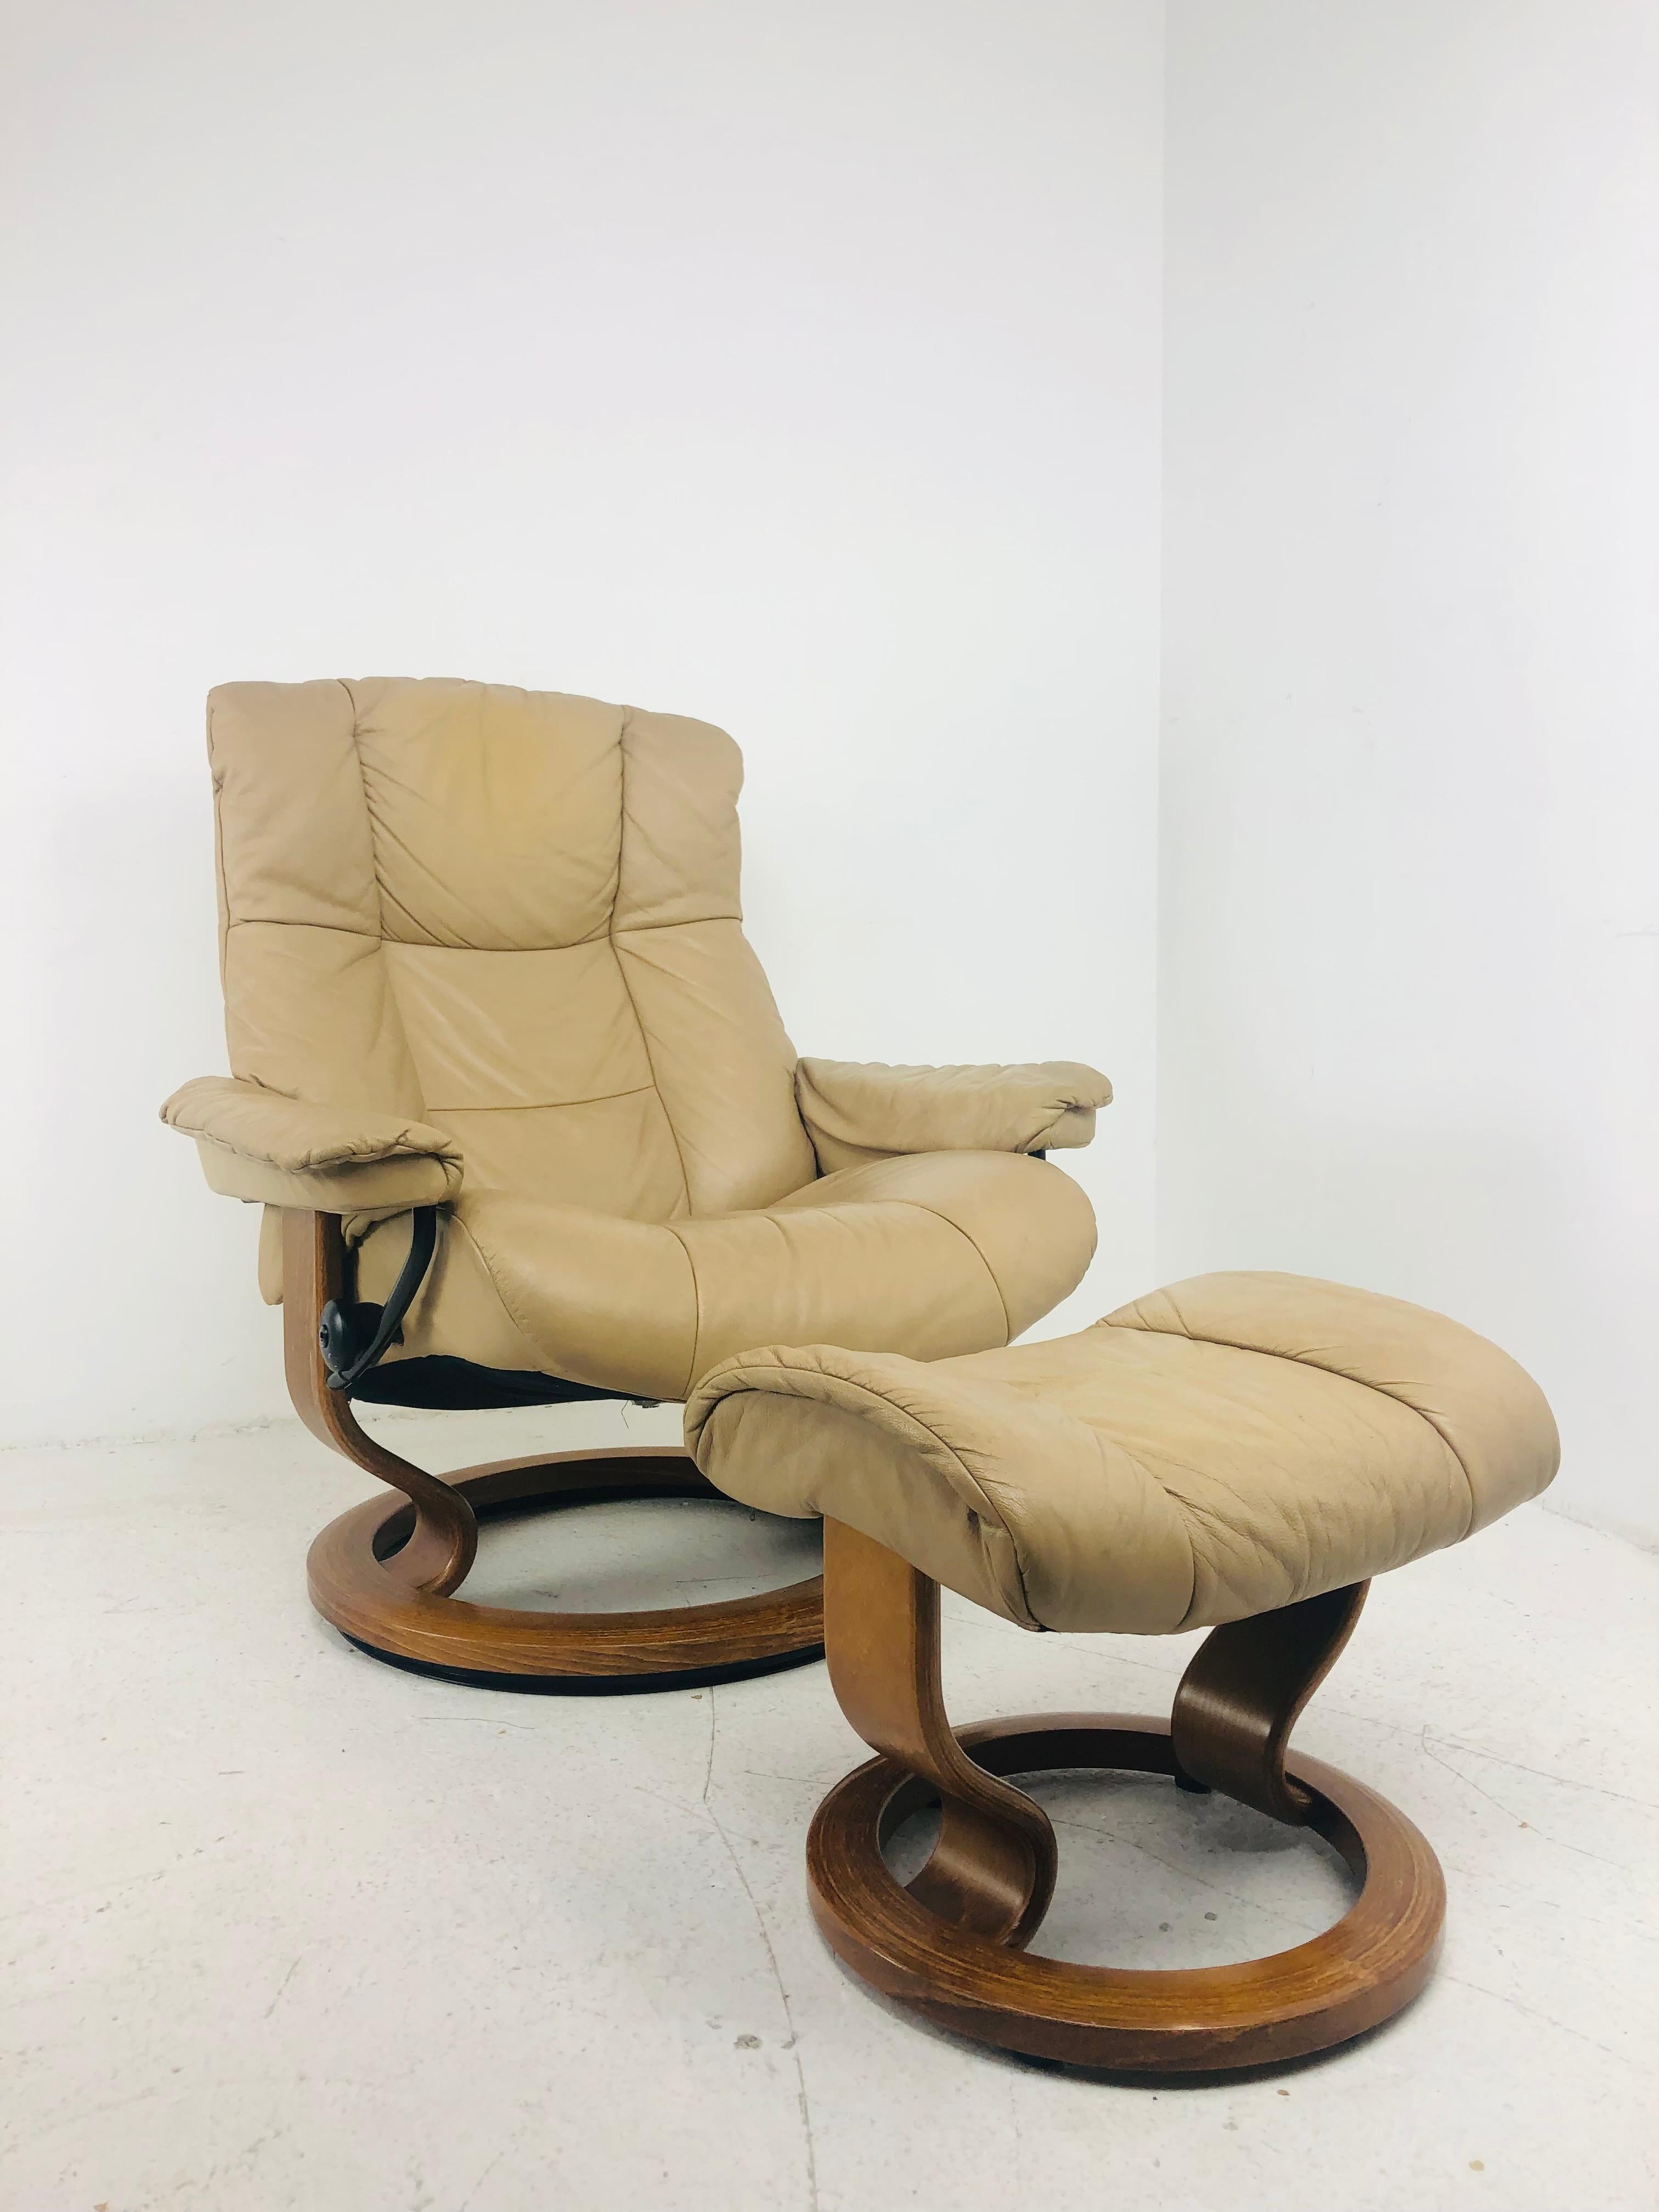 stressless chairs